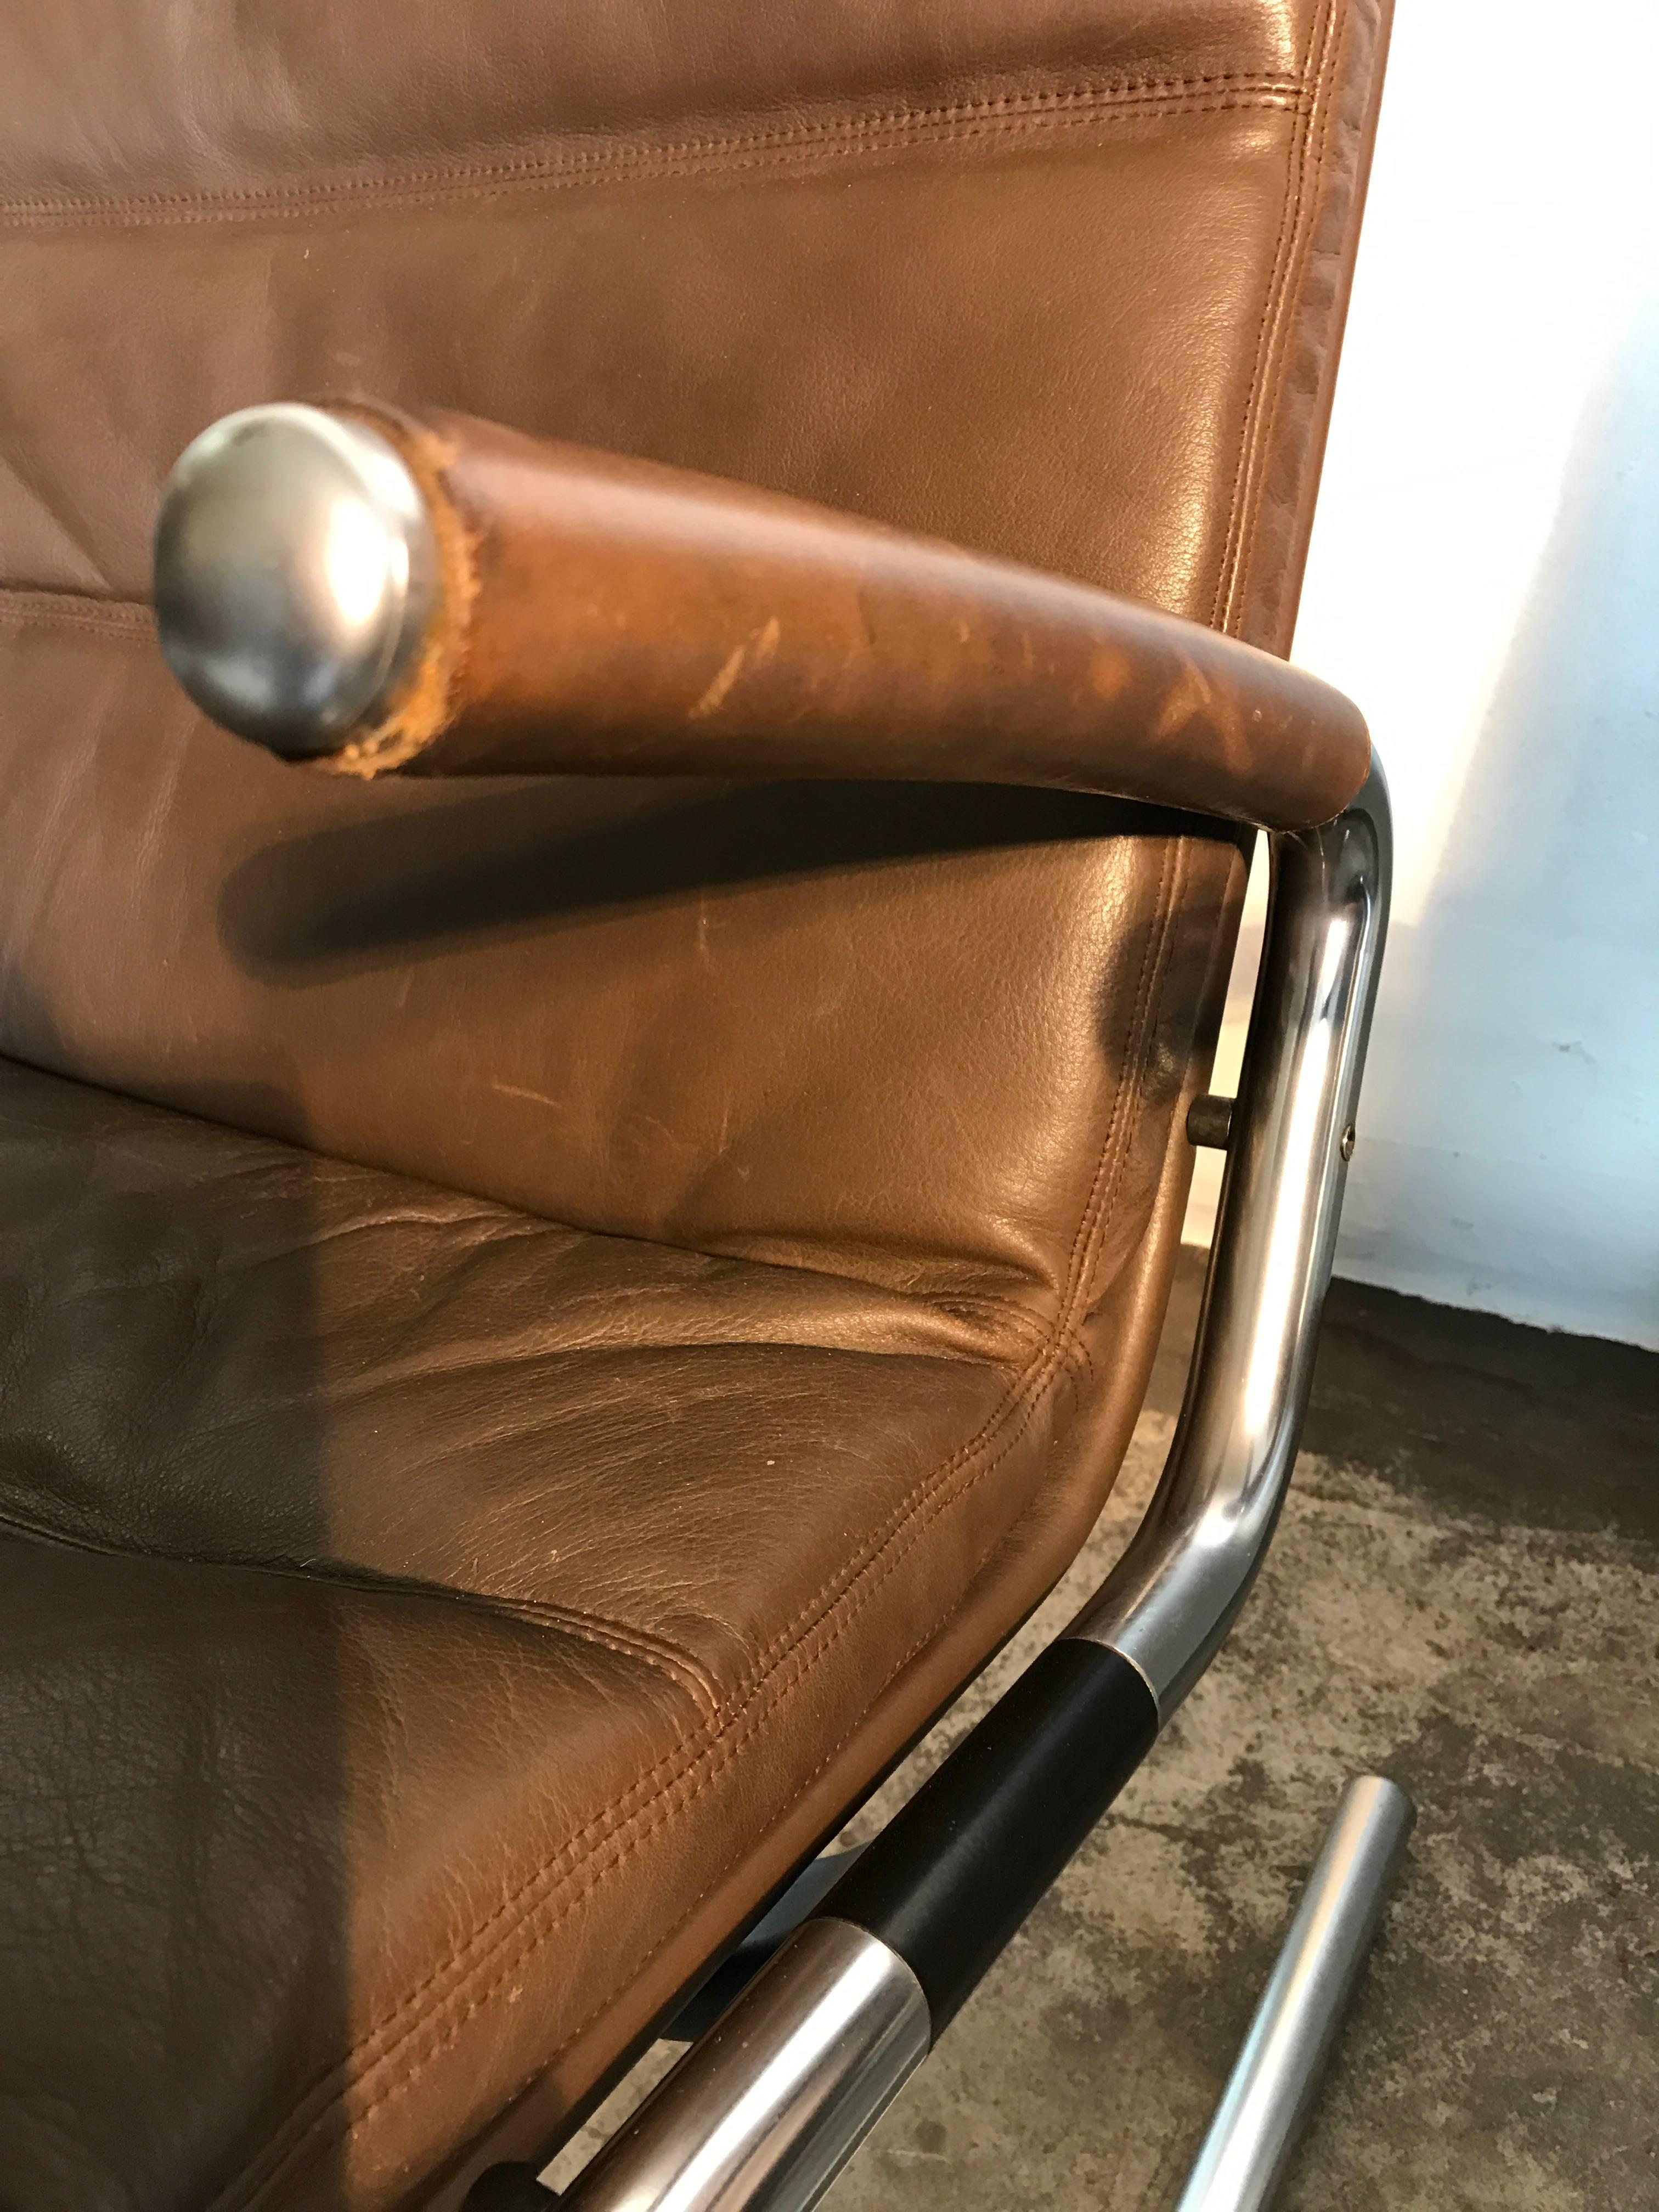 A set of two lounge chairs designed by Jorgen Kastholm. Manufactured by Kusch & Co., Germany.
They date back to the 1960s.
Brown leather on tubular brushed steel legs, armrests also upholstered.
Comfortable free floating club chairs typically